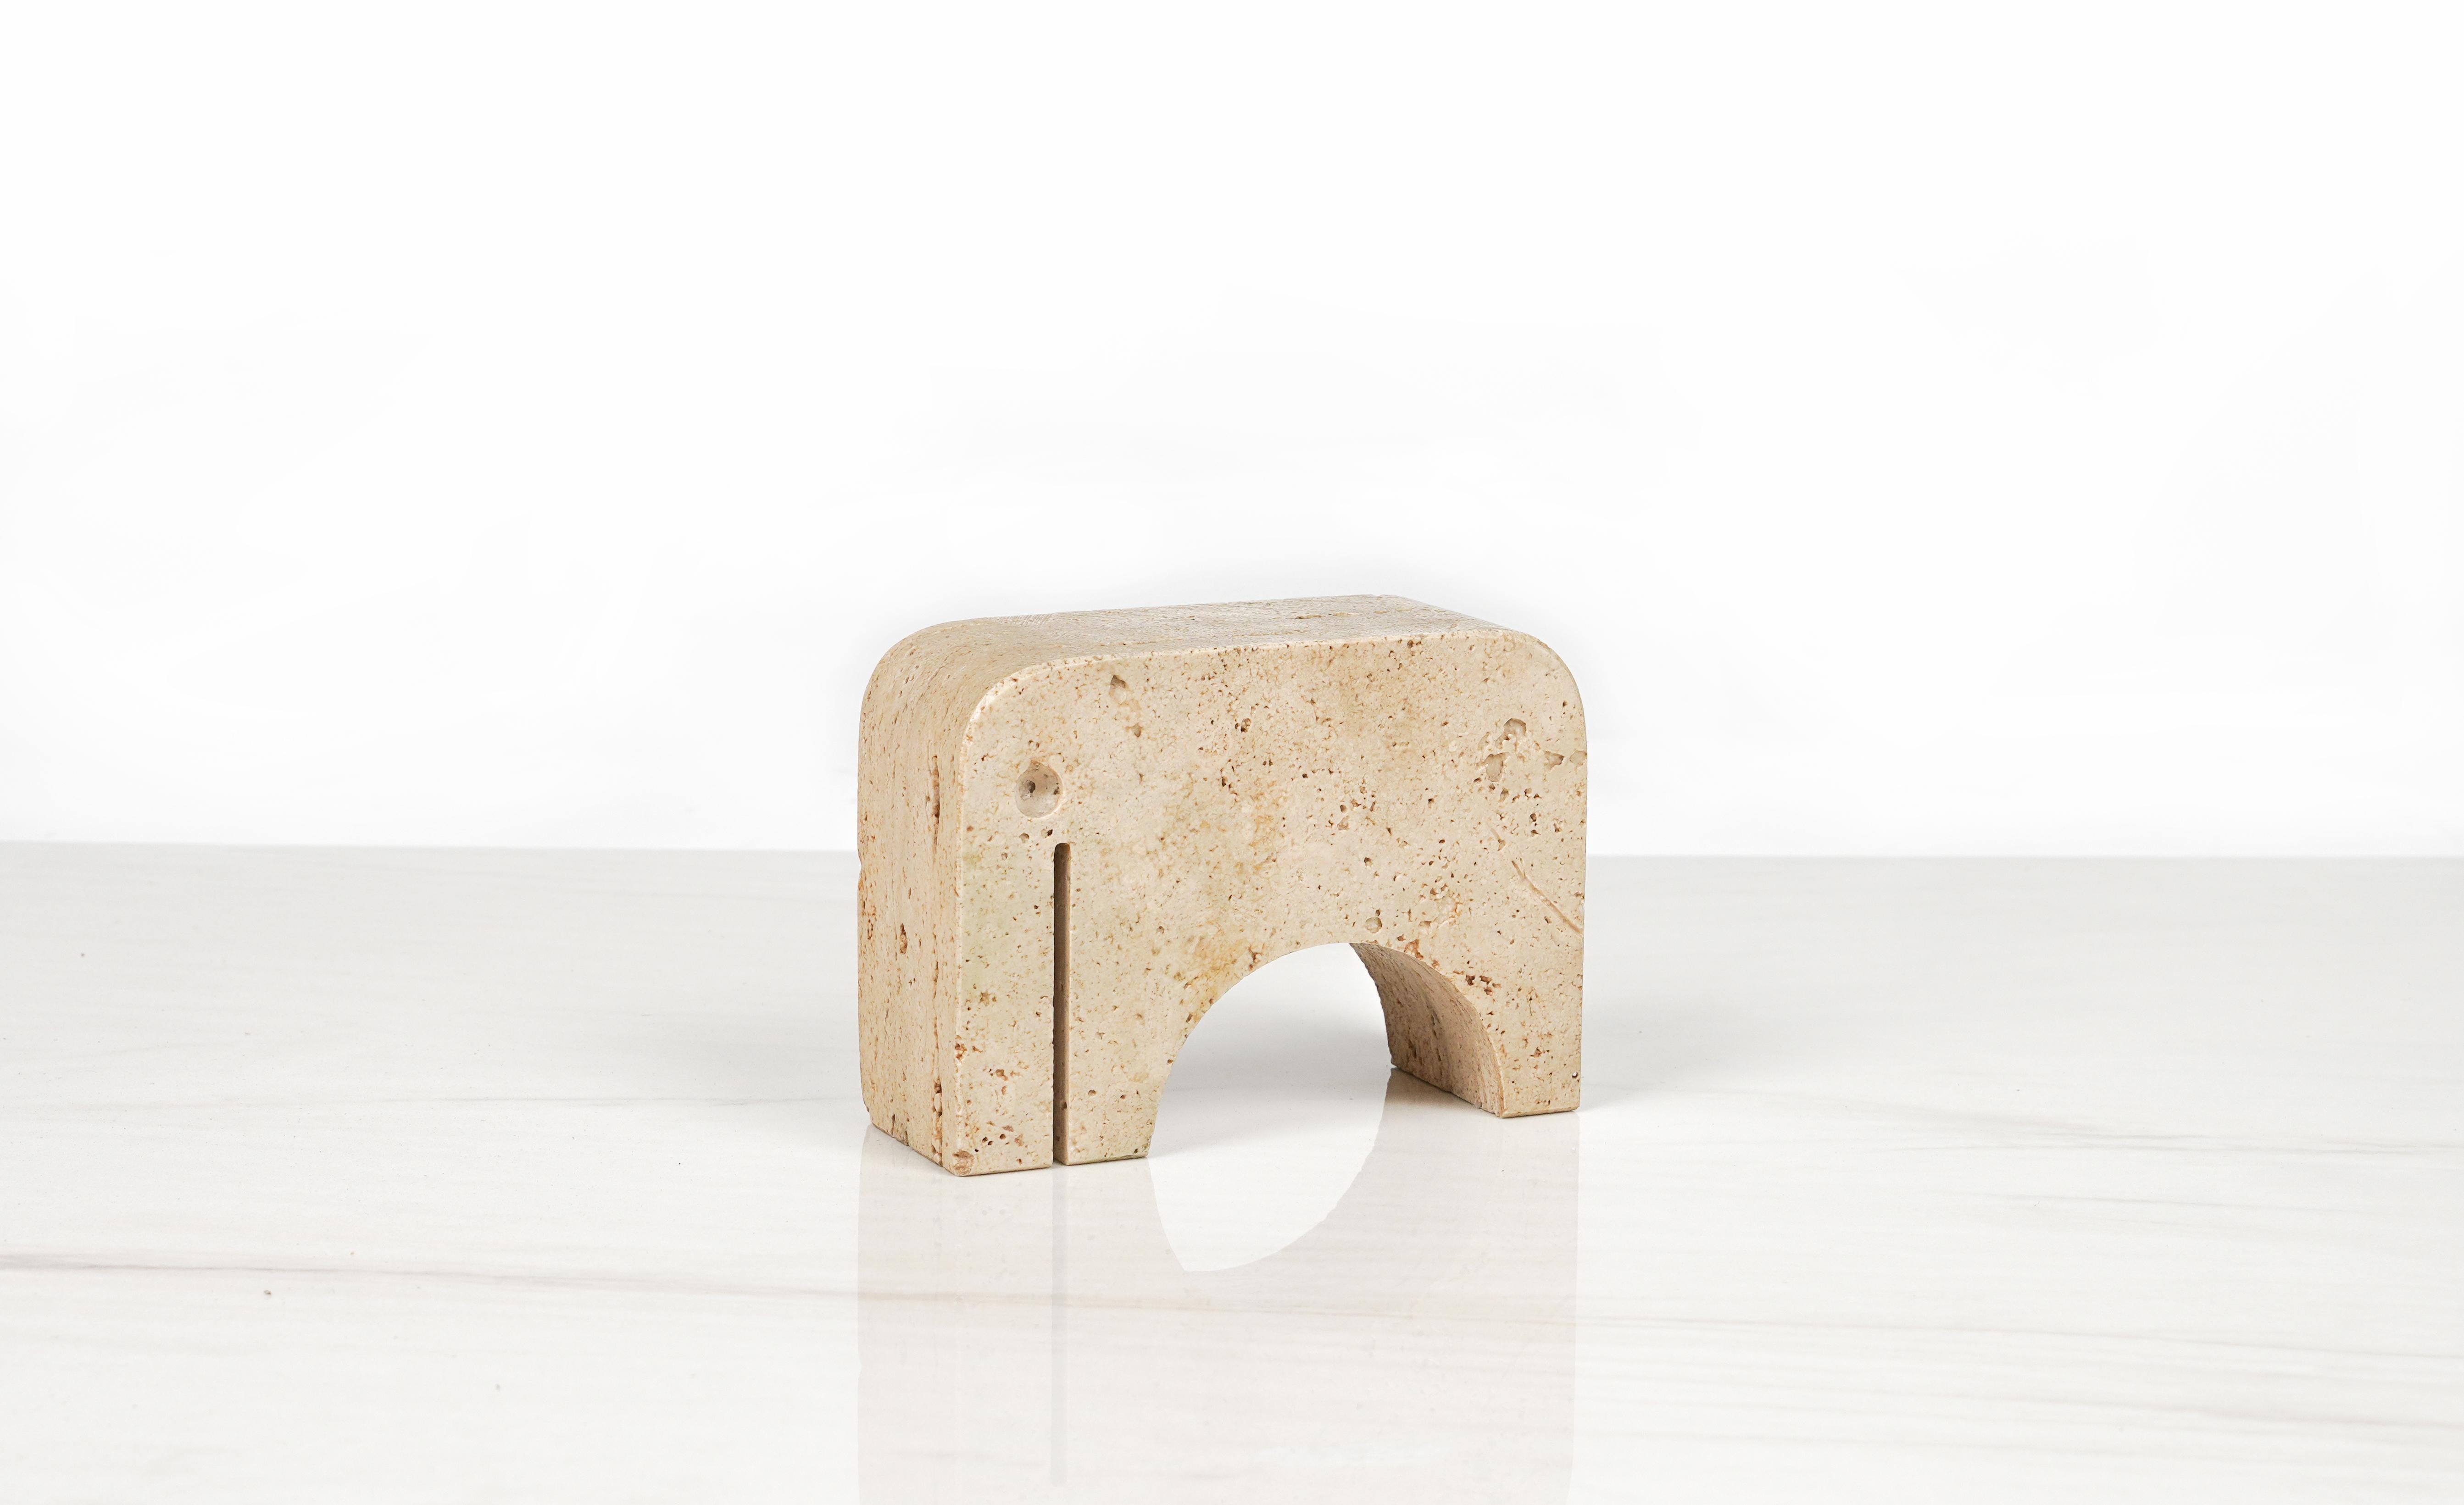 Midcentury amazing sculpture / bookend in travertine marble in the shape of elephant by Fratelli Mannelli.

Made in Italy in the 1970s.

Perfect desk object or gift idea.